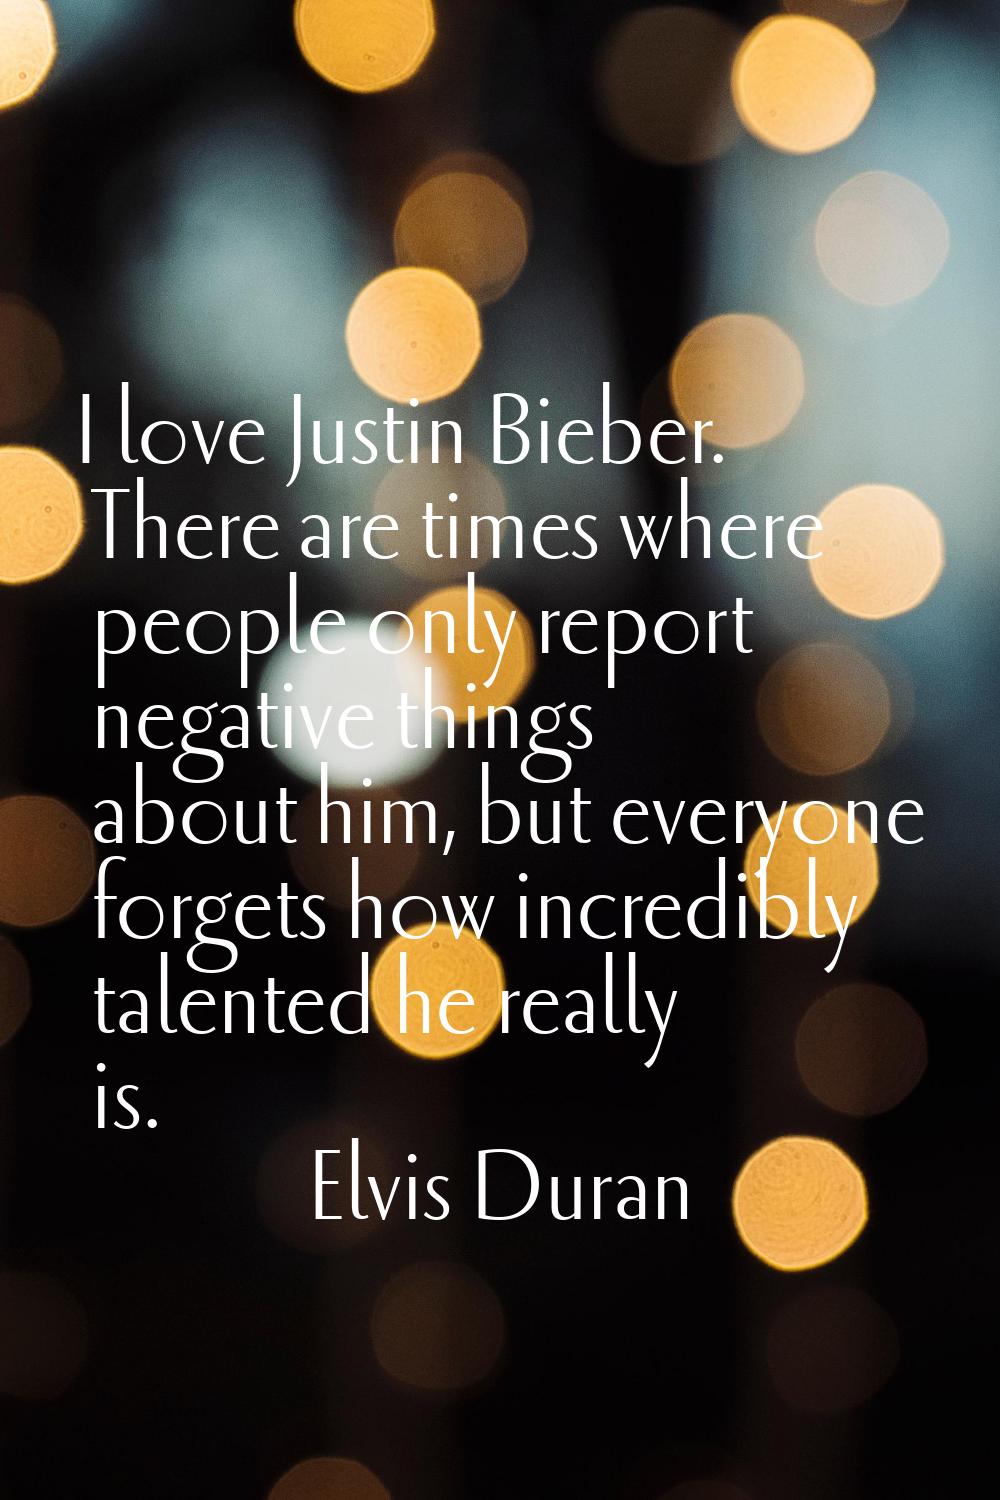 I love Justin Bieber. There are times where people only report negative things about him, but every